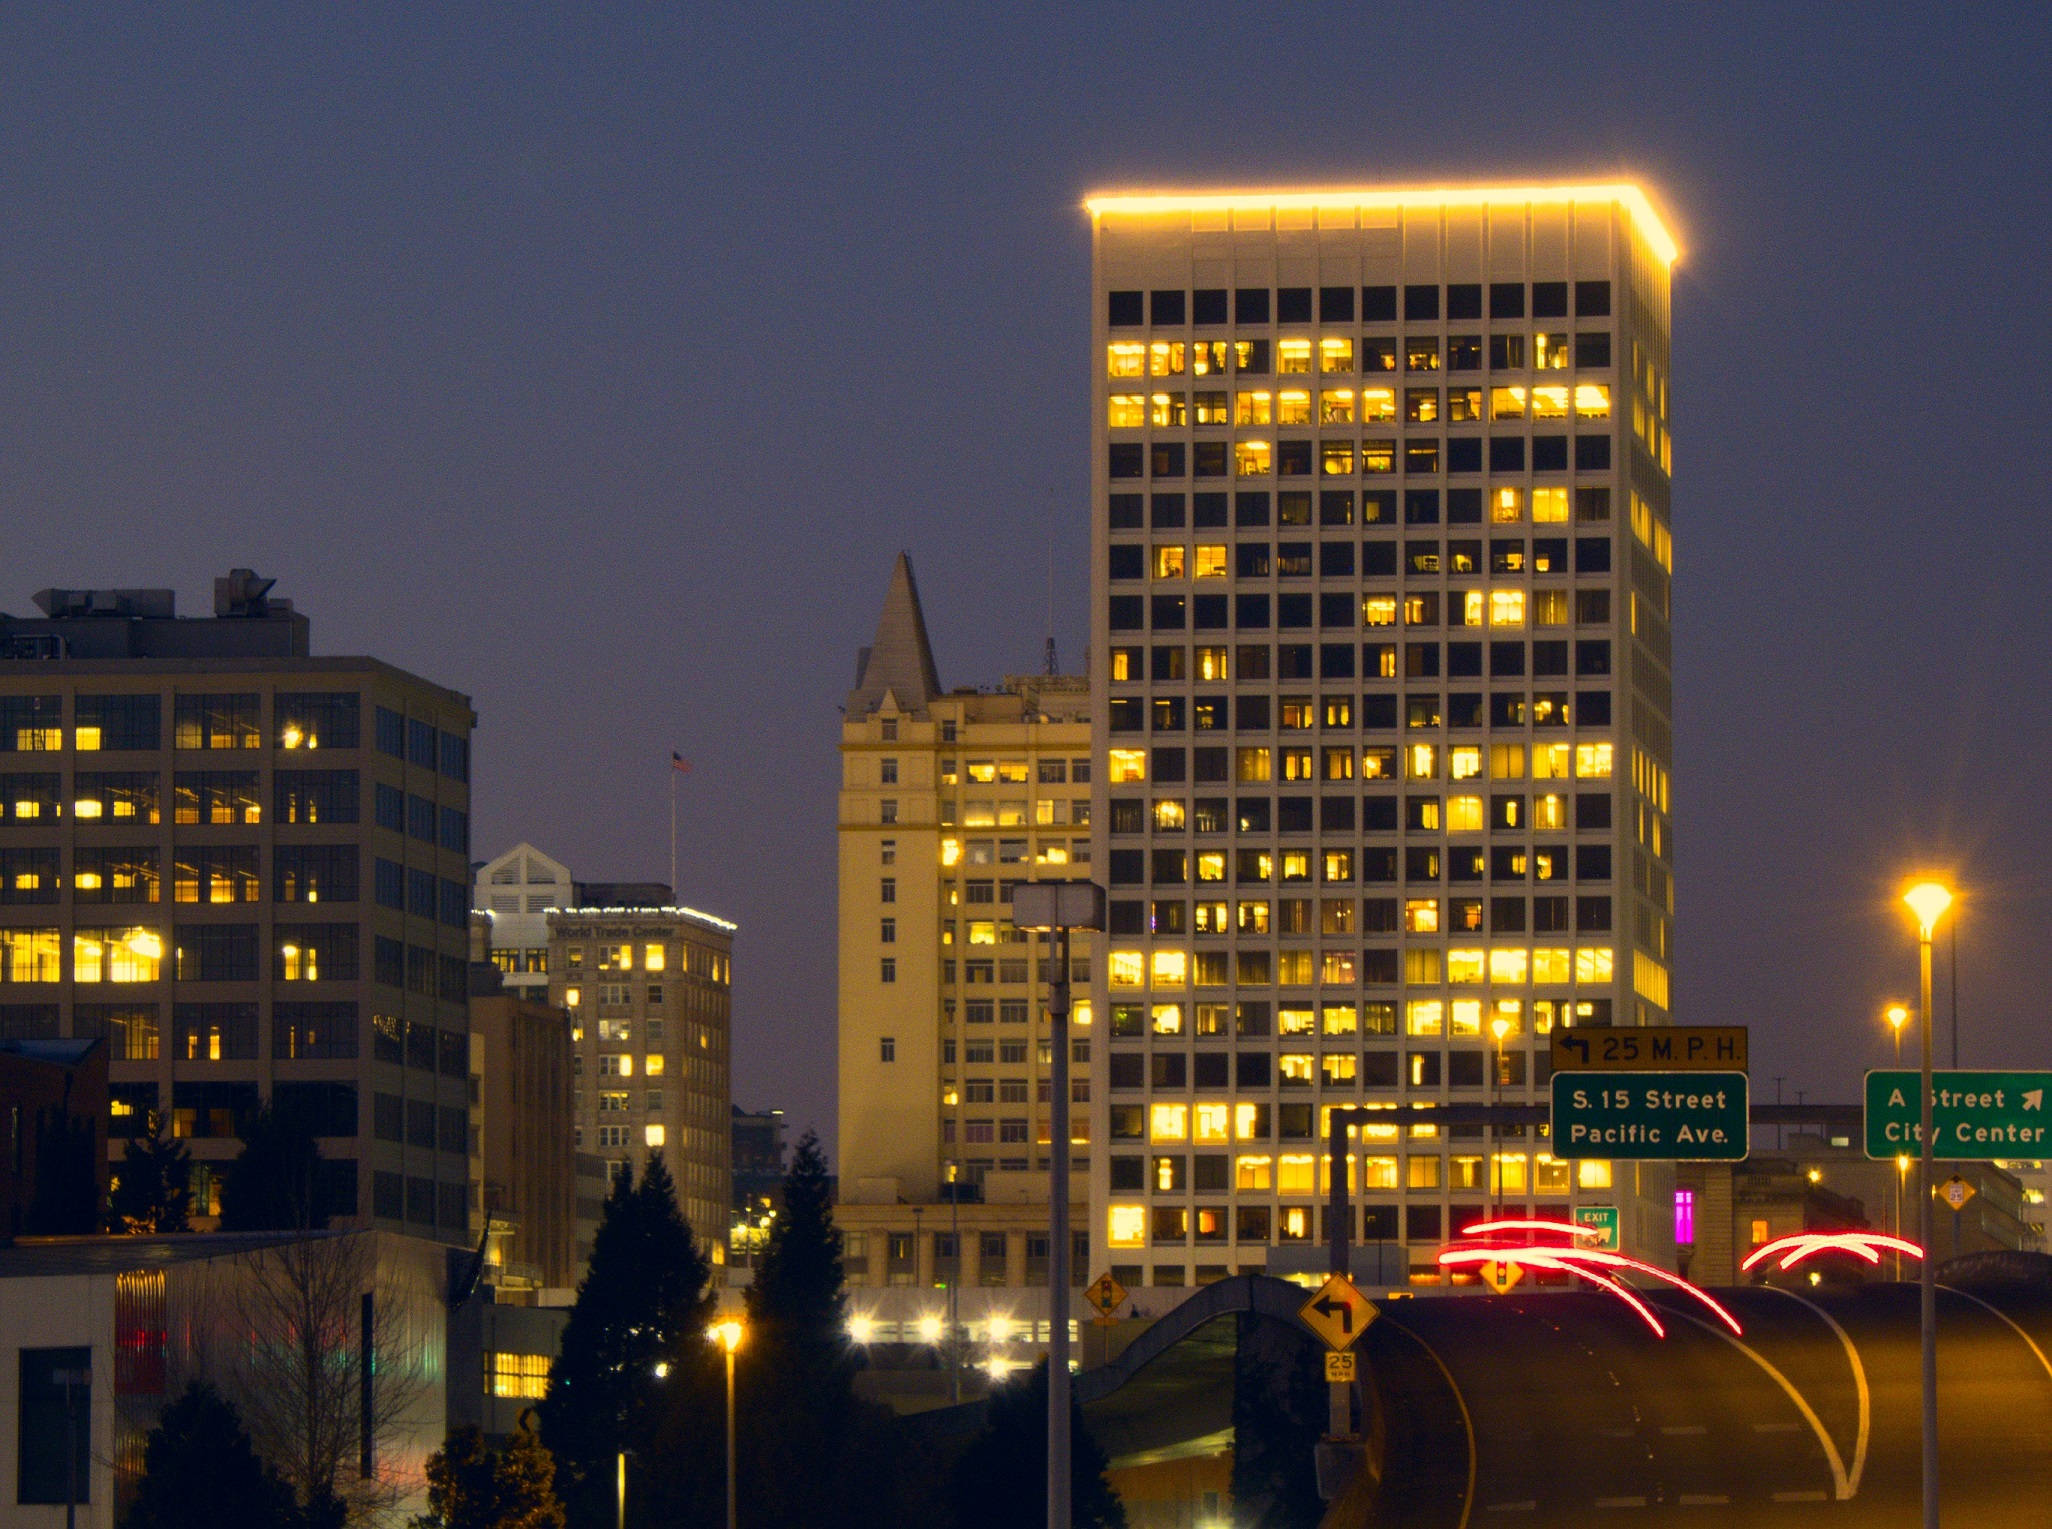 PICTURED: Buildings in downtown Tacoma at night from the perspective of I-705, which is in the foreground.